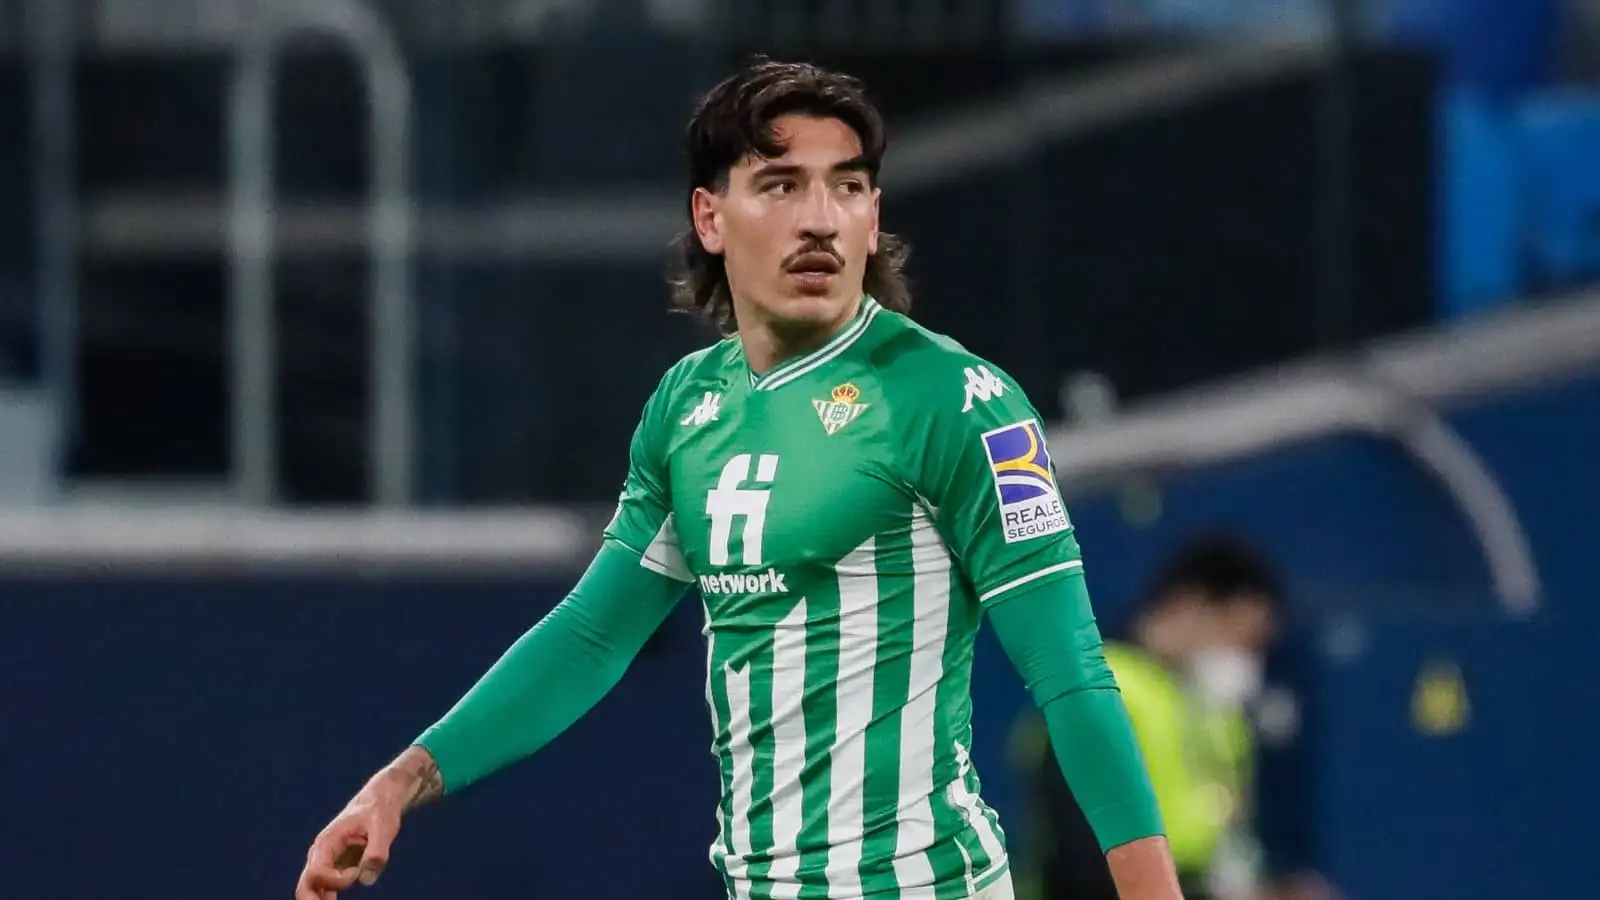 Hector Bellerin on loan at Real Betis